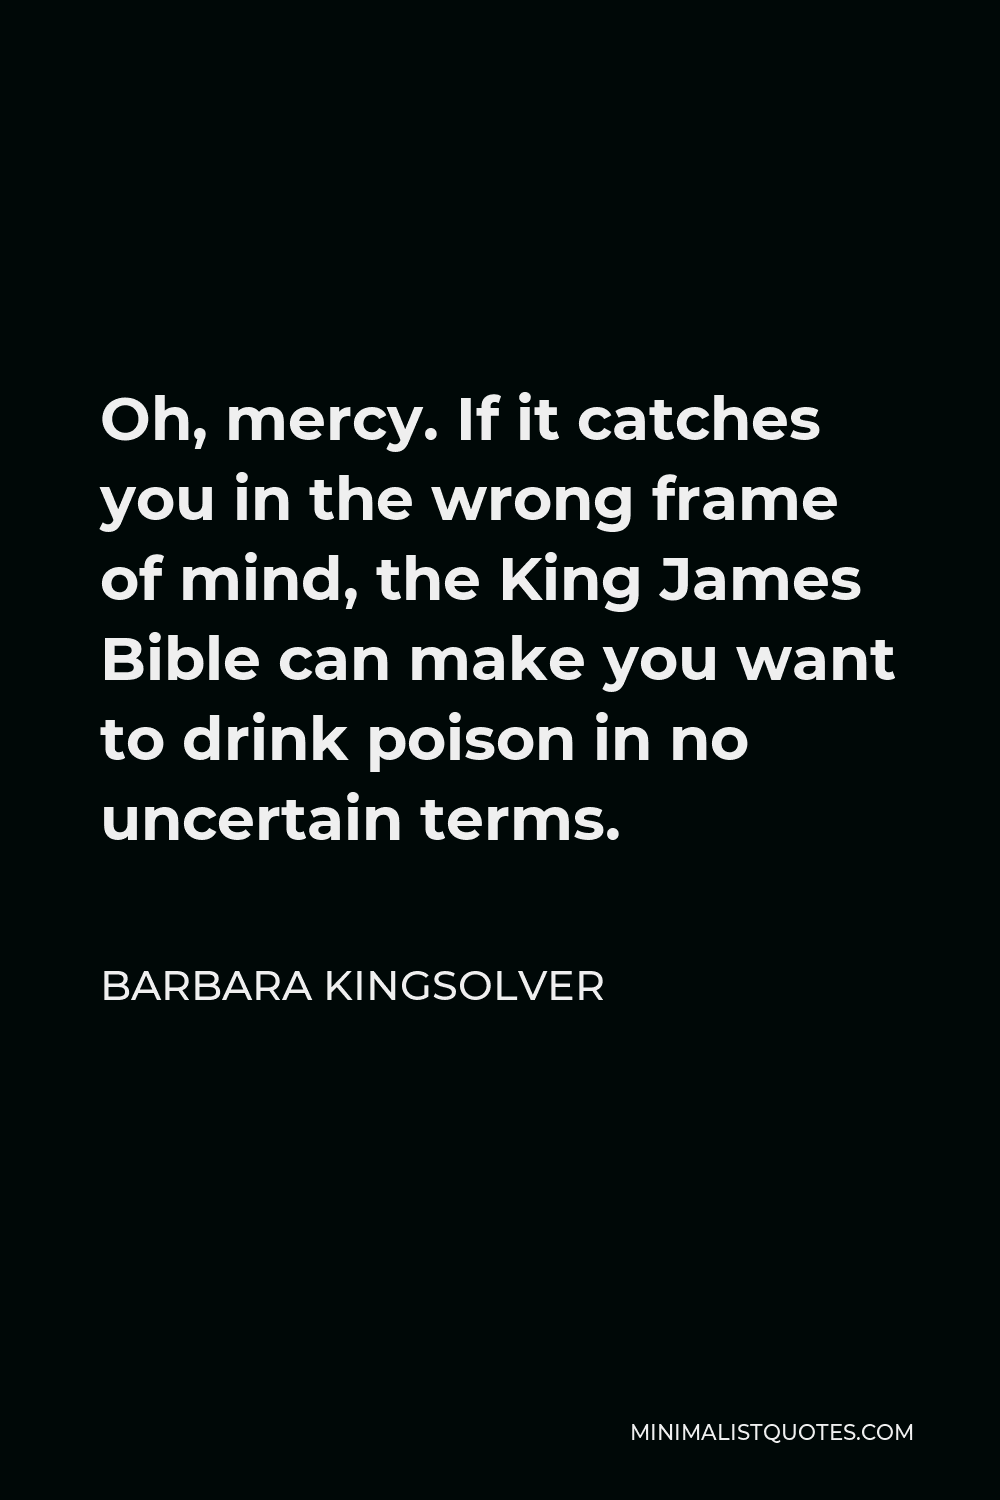 Barbara Kingsolver Quote - Oh, mercy. If it catches you in the wrong frame of mind, the King James Bible can make you want to drink poison in no uncertain terms.